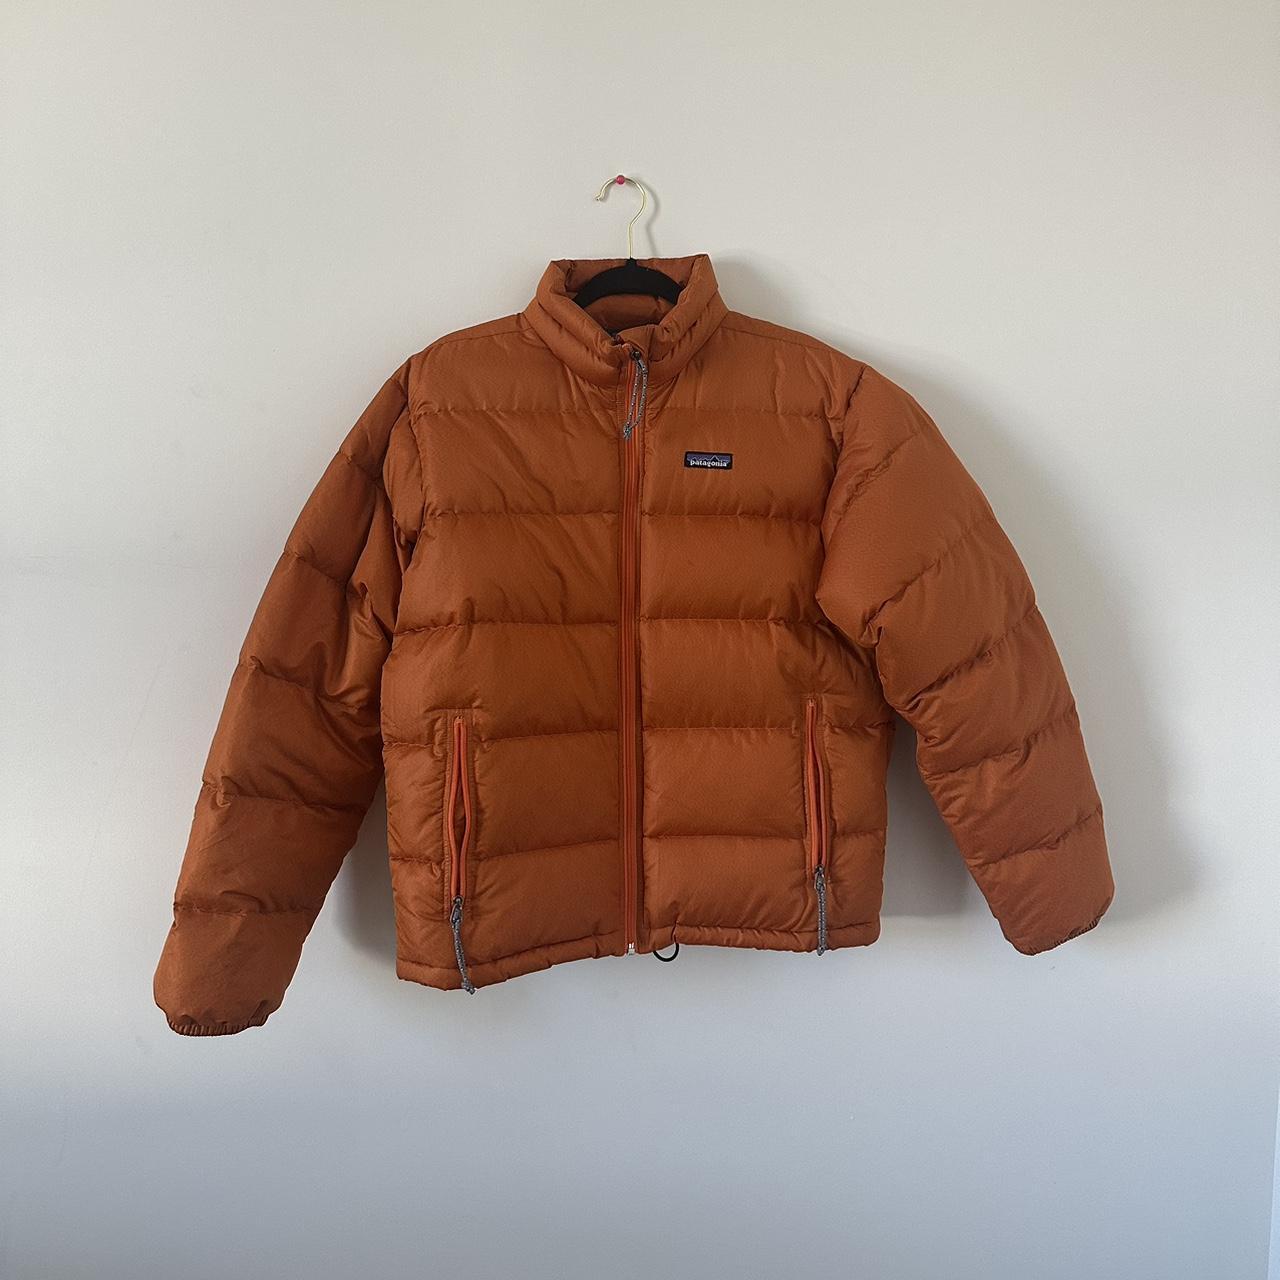 Patagonia puffer jacket Says Size Small but fits... - Depop